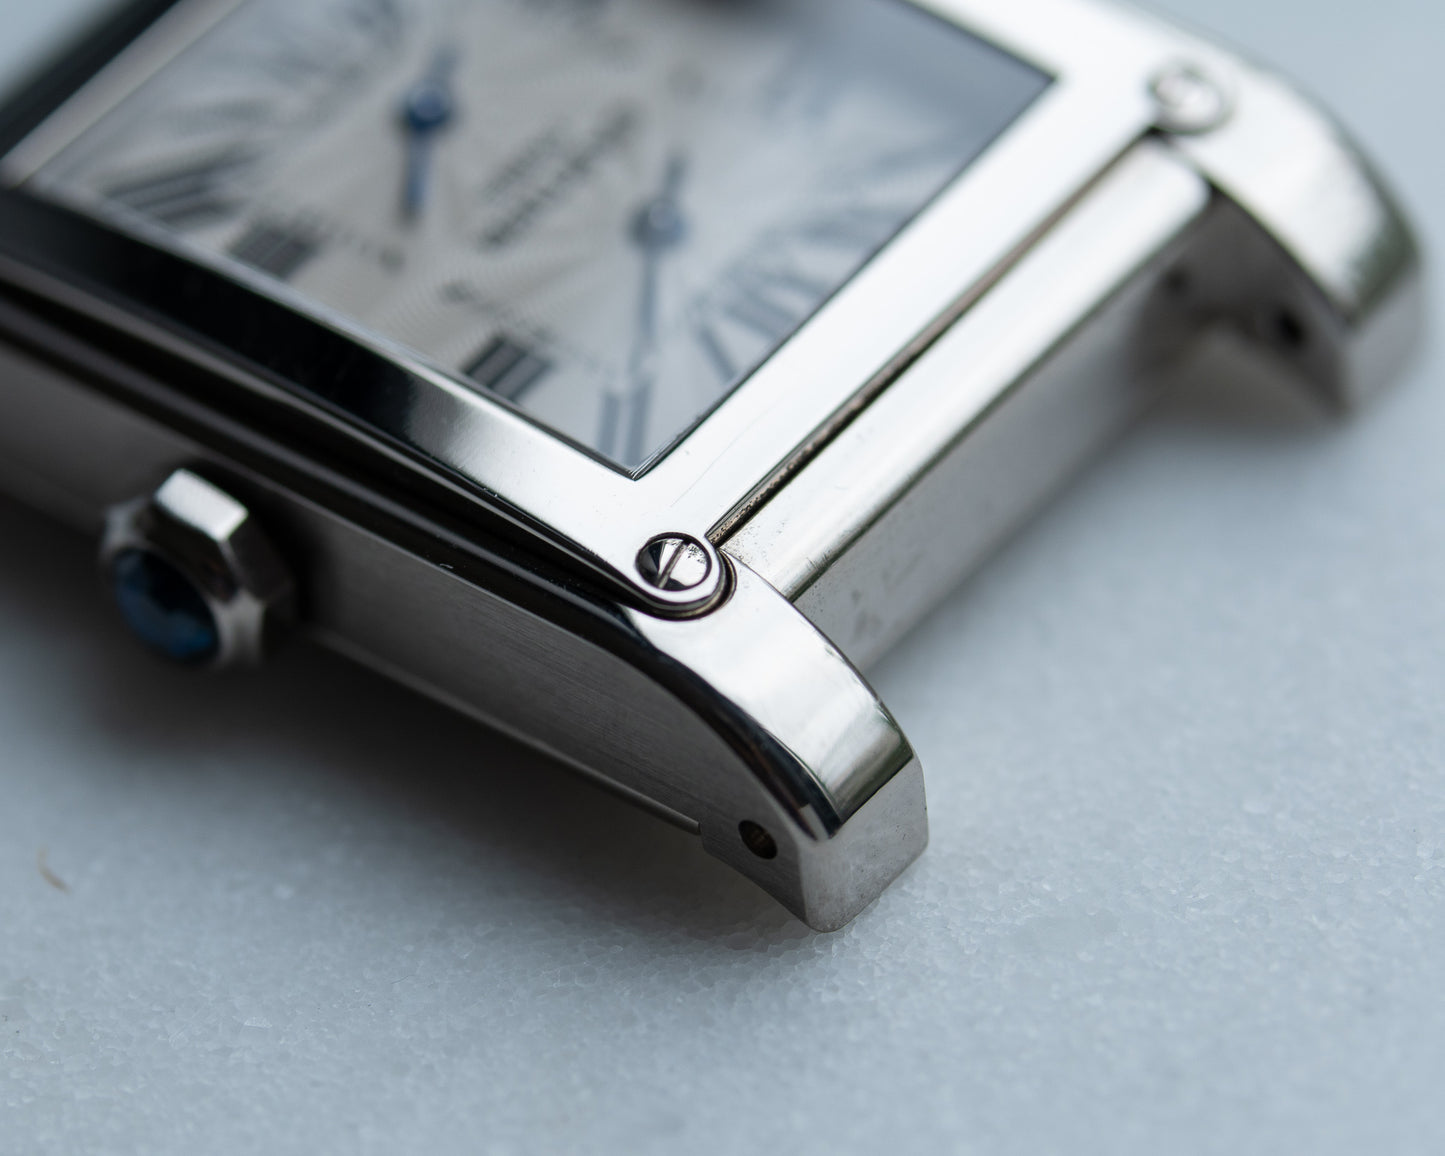 Cartier Tank à Vis Dual Time CPCP in white gold, full set